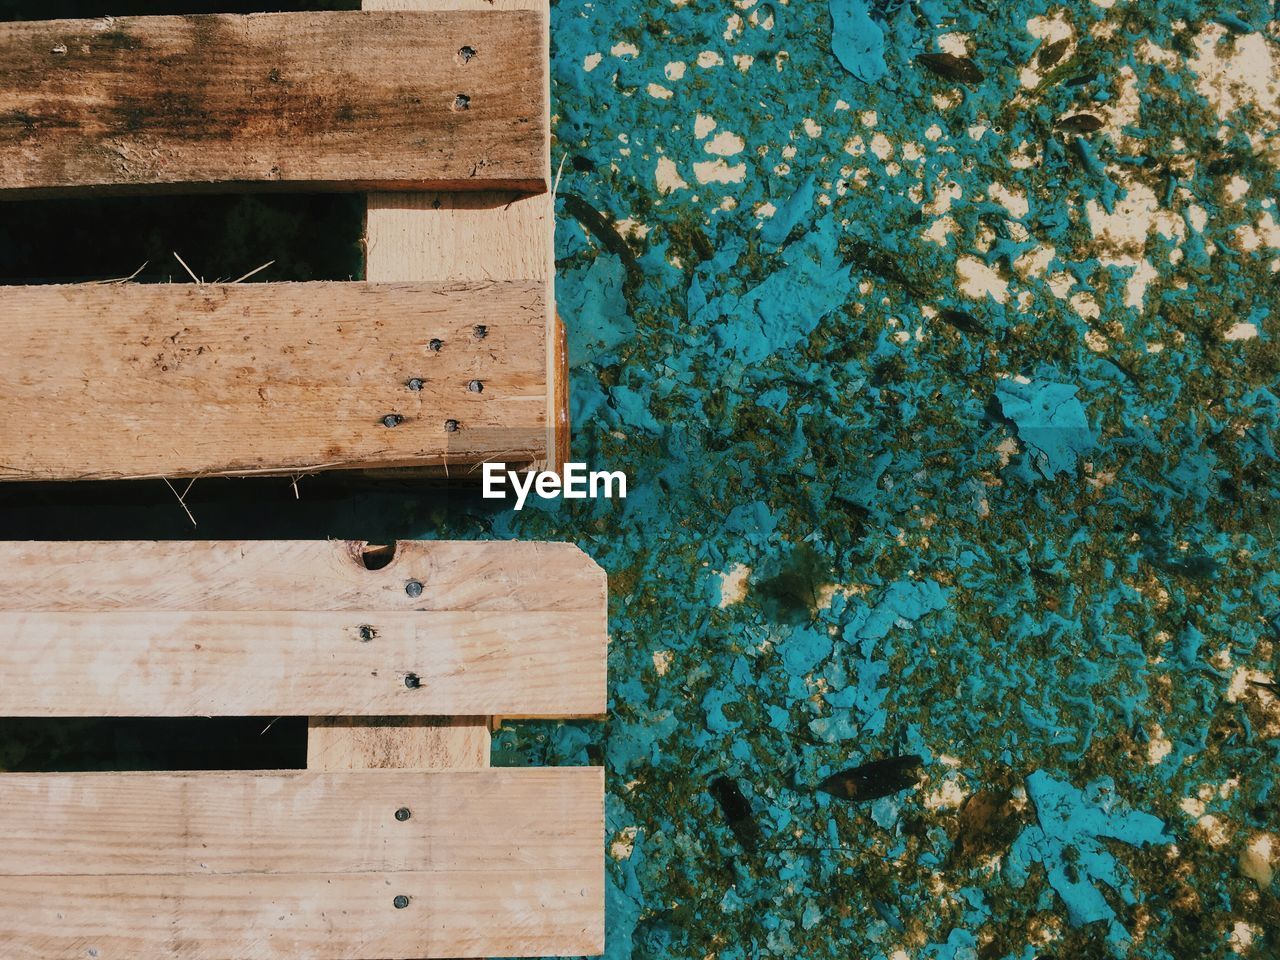 High angle view of wooden plank by pond